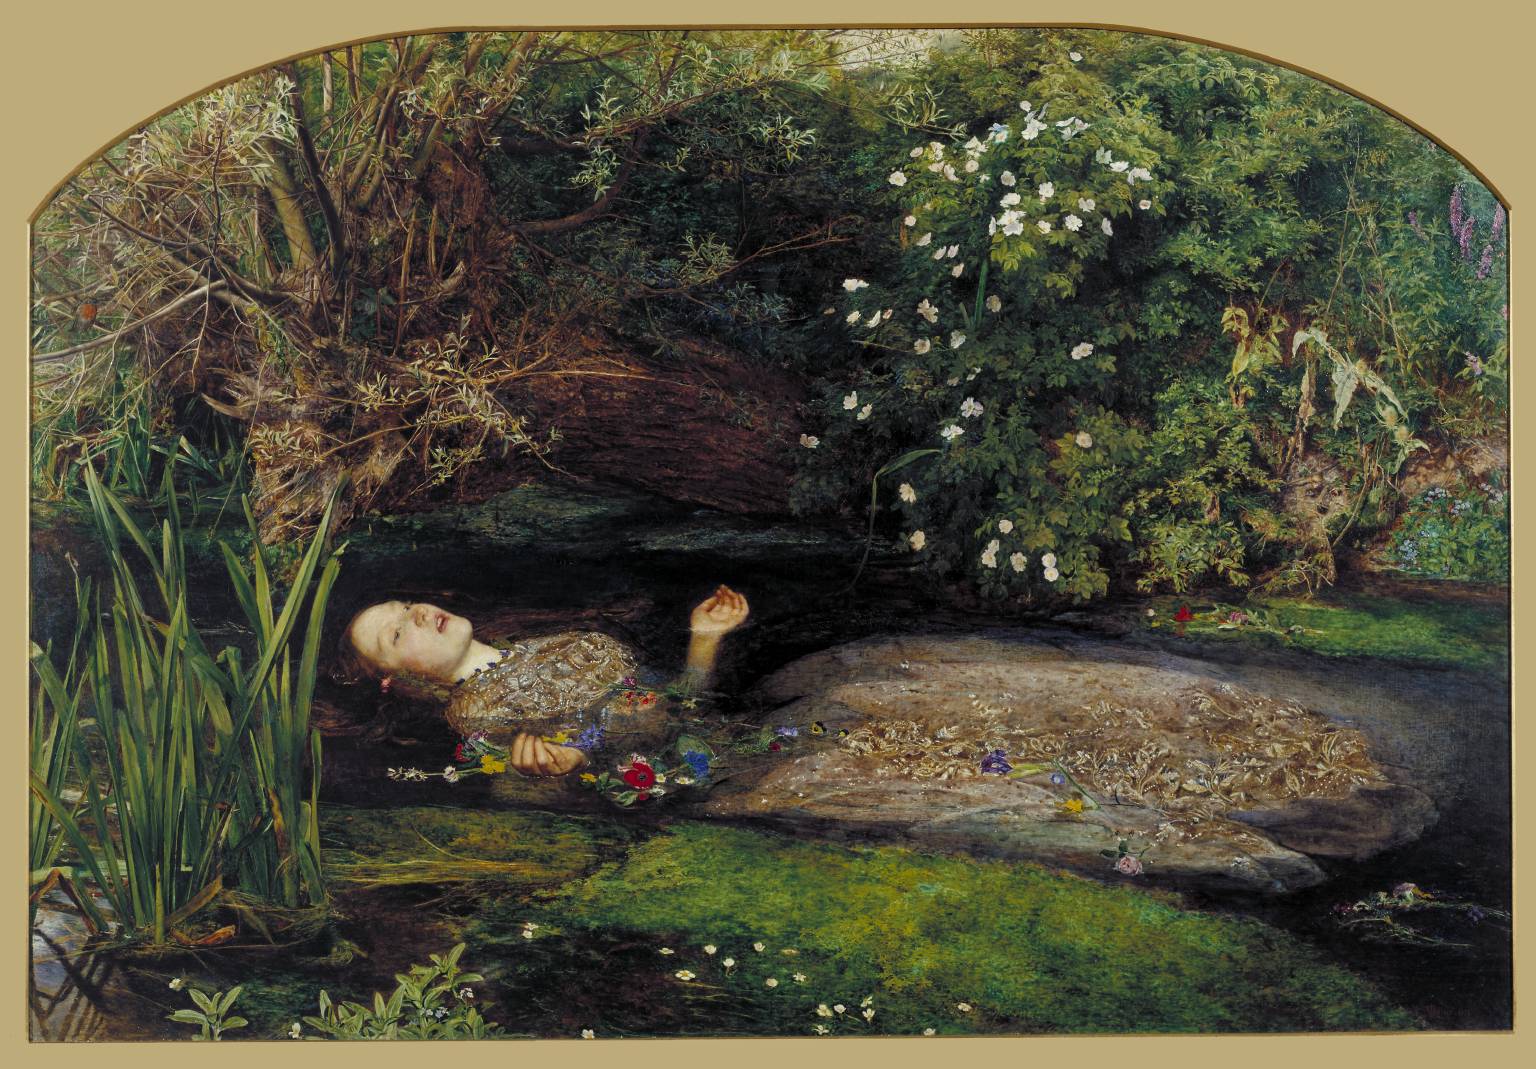 Ophelia, by John Everett Millais.  Lizzie Siddal was the model for Ophelia, and became ill after staying too long in a tub of cold water in order to create a realistic model for the painting.